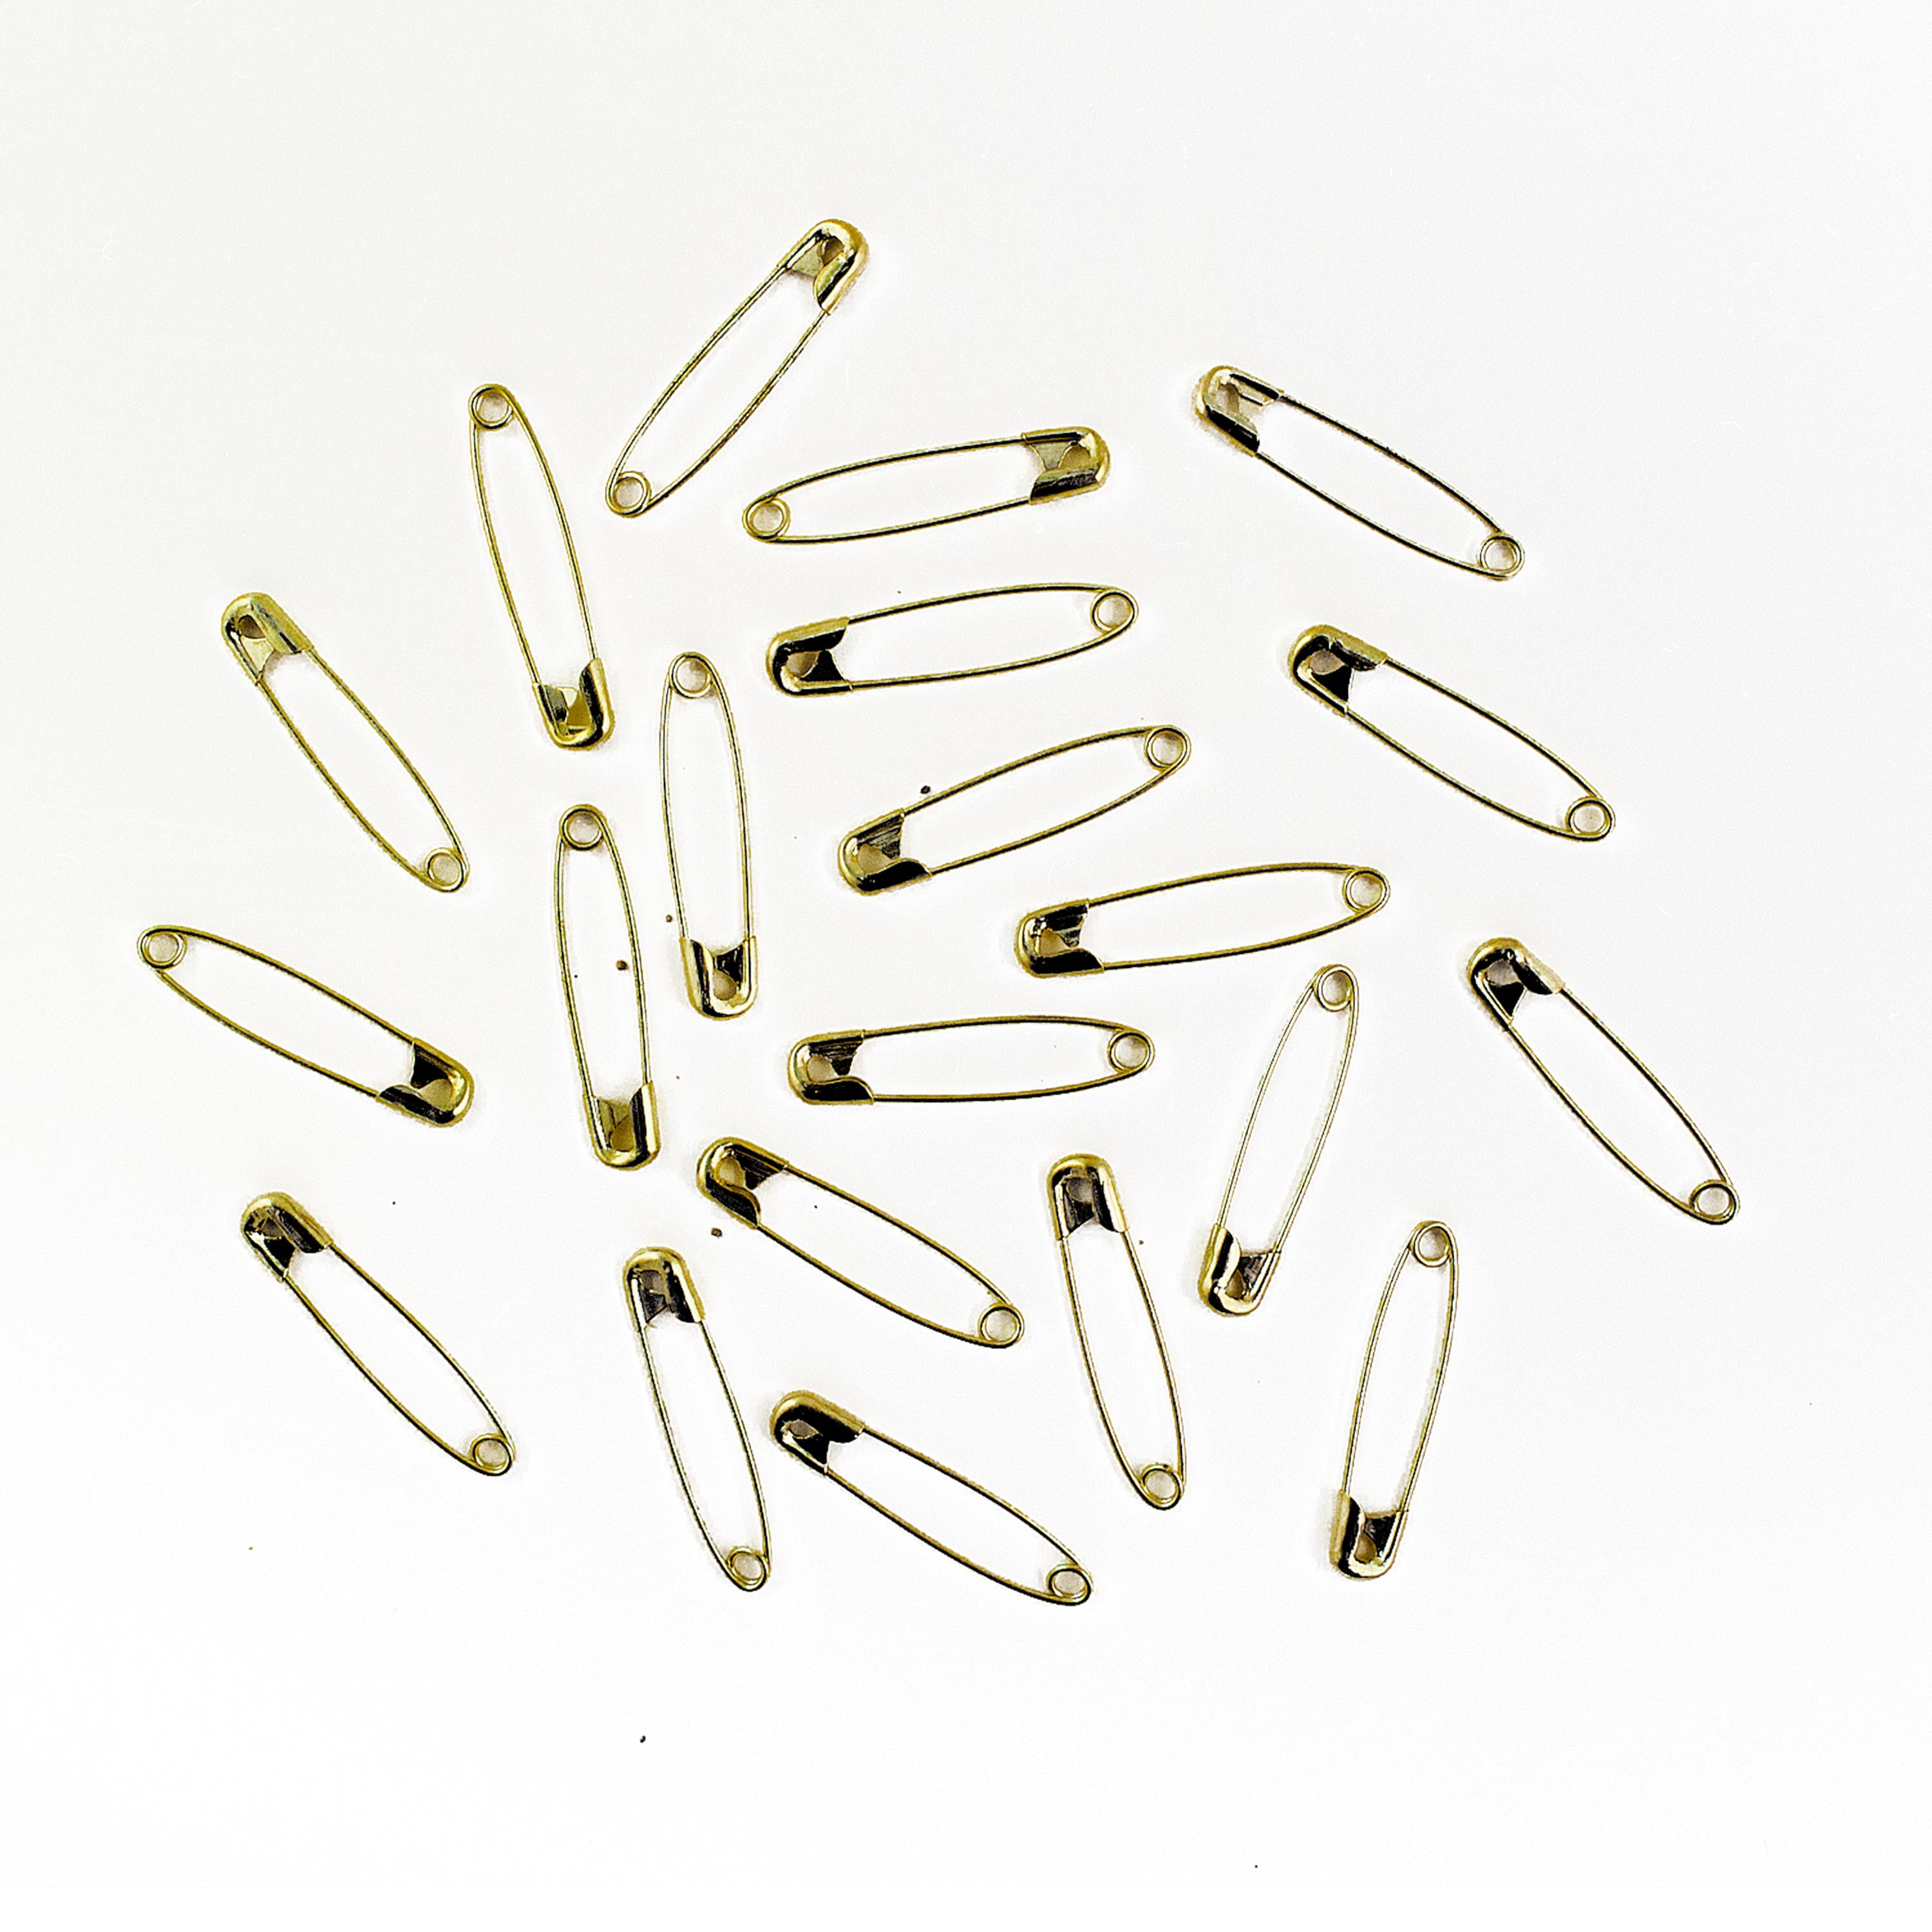 Steel Button Safety Pins - #00 - 3/4 - 10/Pack